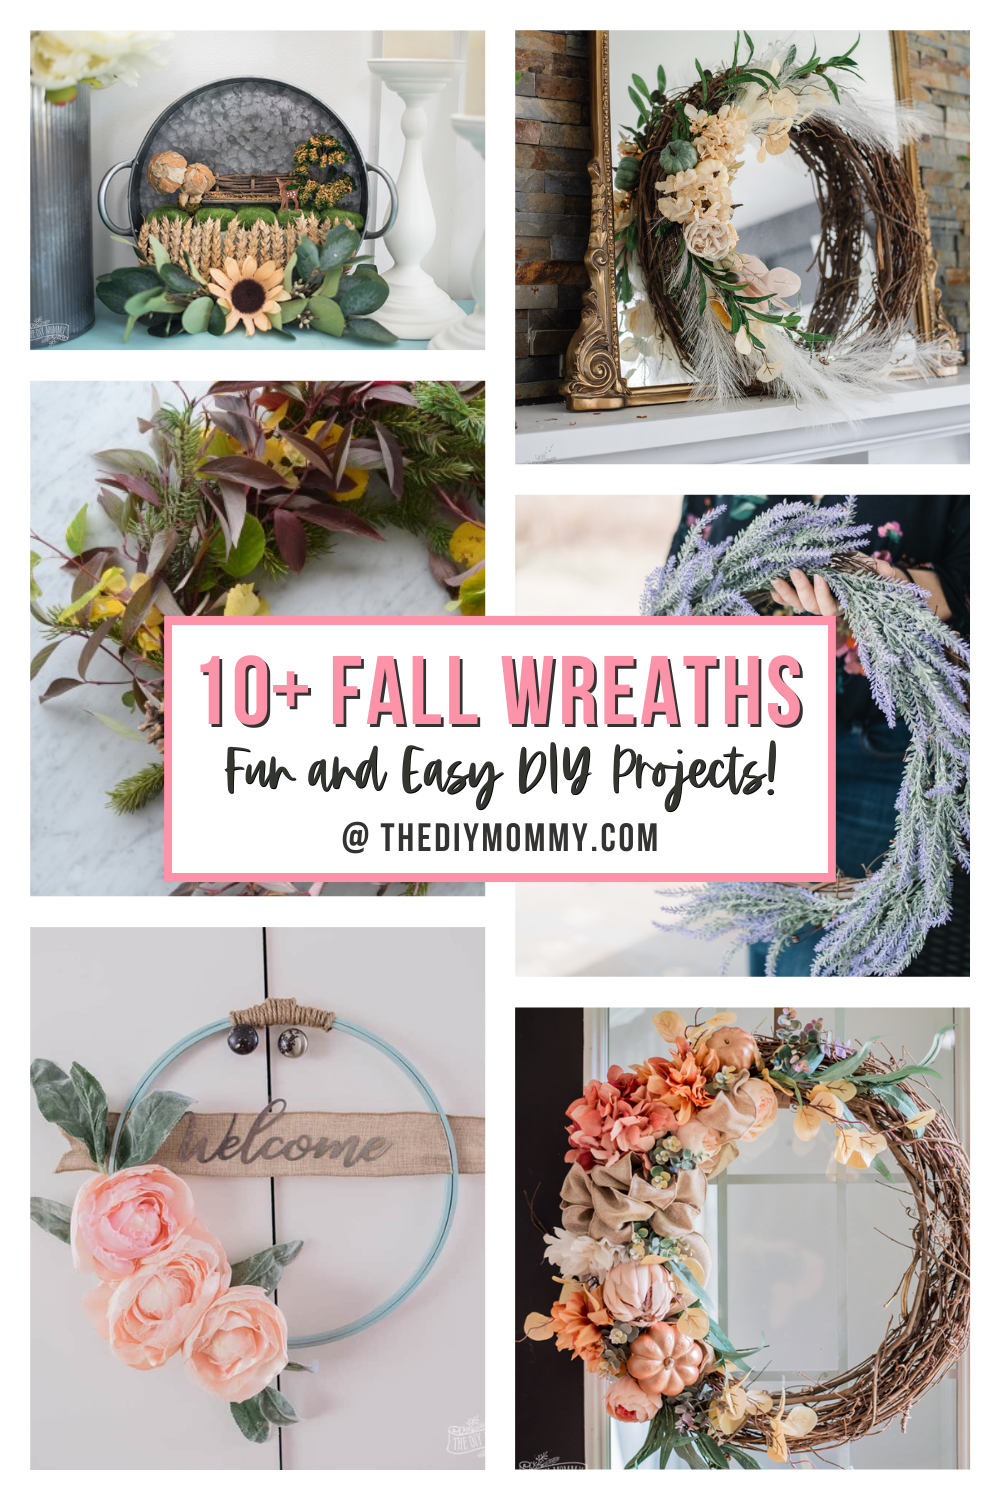 10+ Fall Wreaths: Fun and Easy DIY Projects!